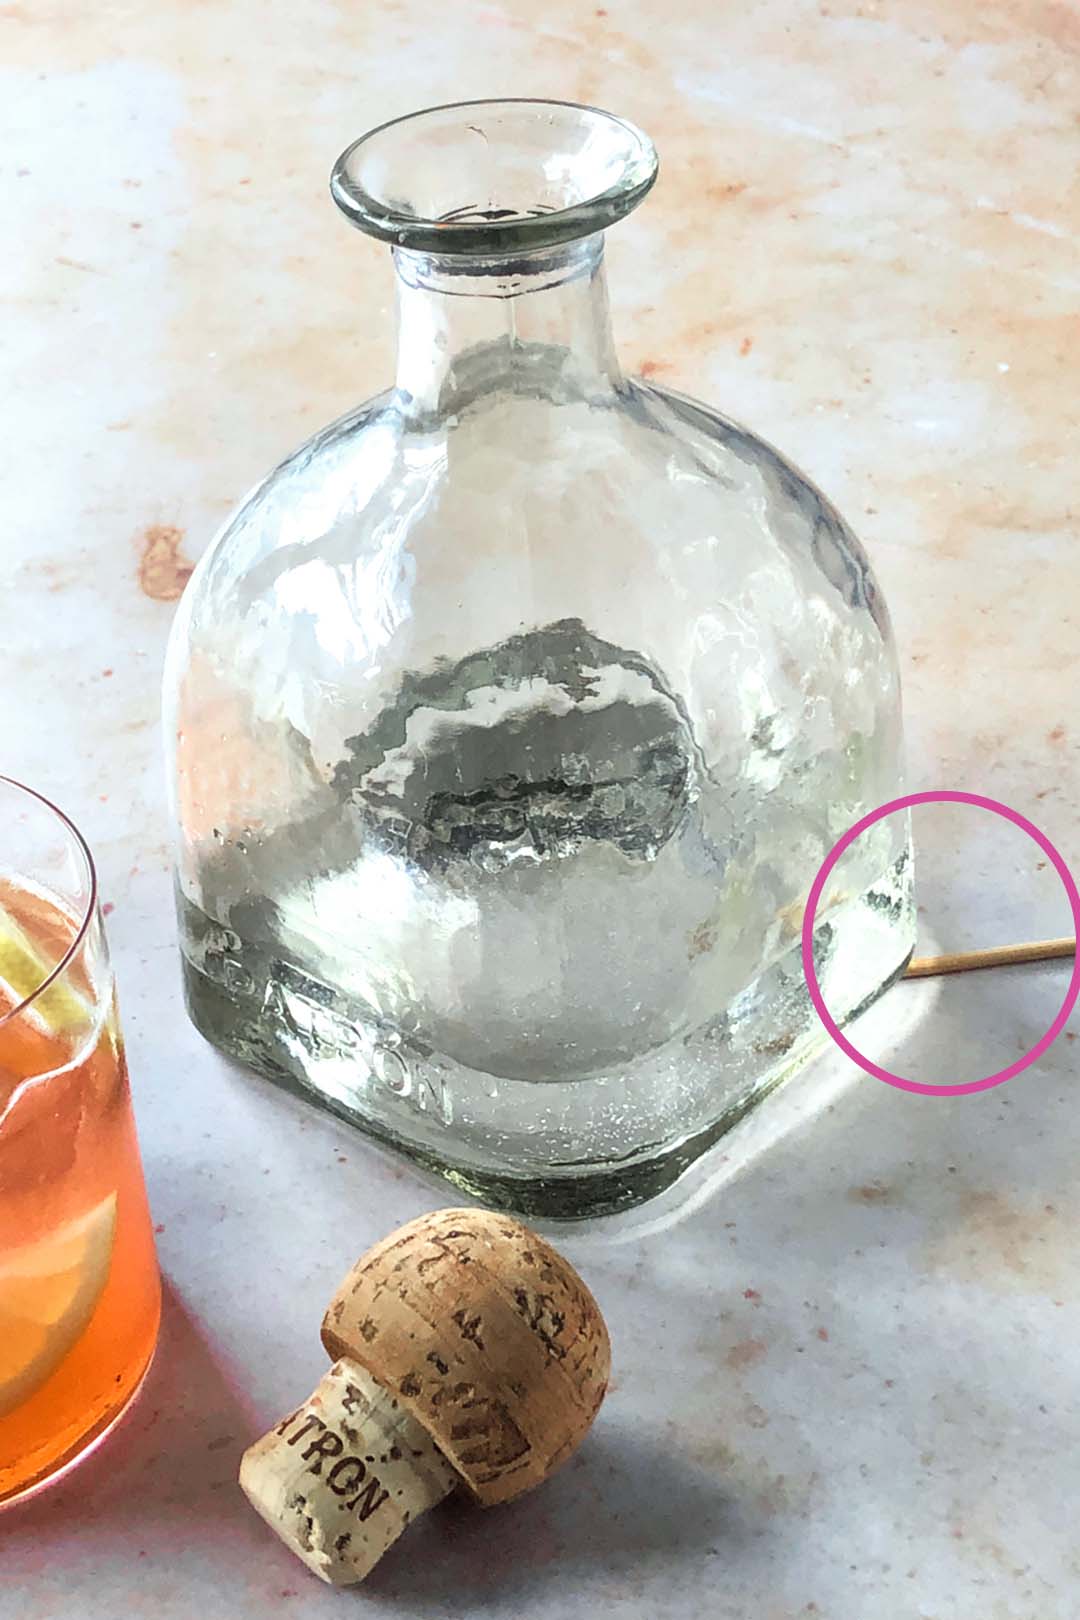 Marble background with a clear glass tequila bottle and a cork in the foreground